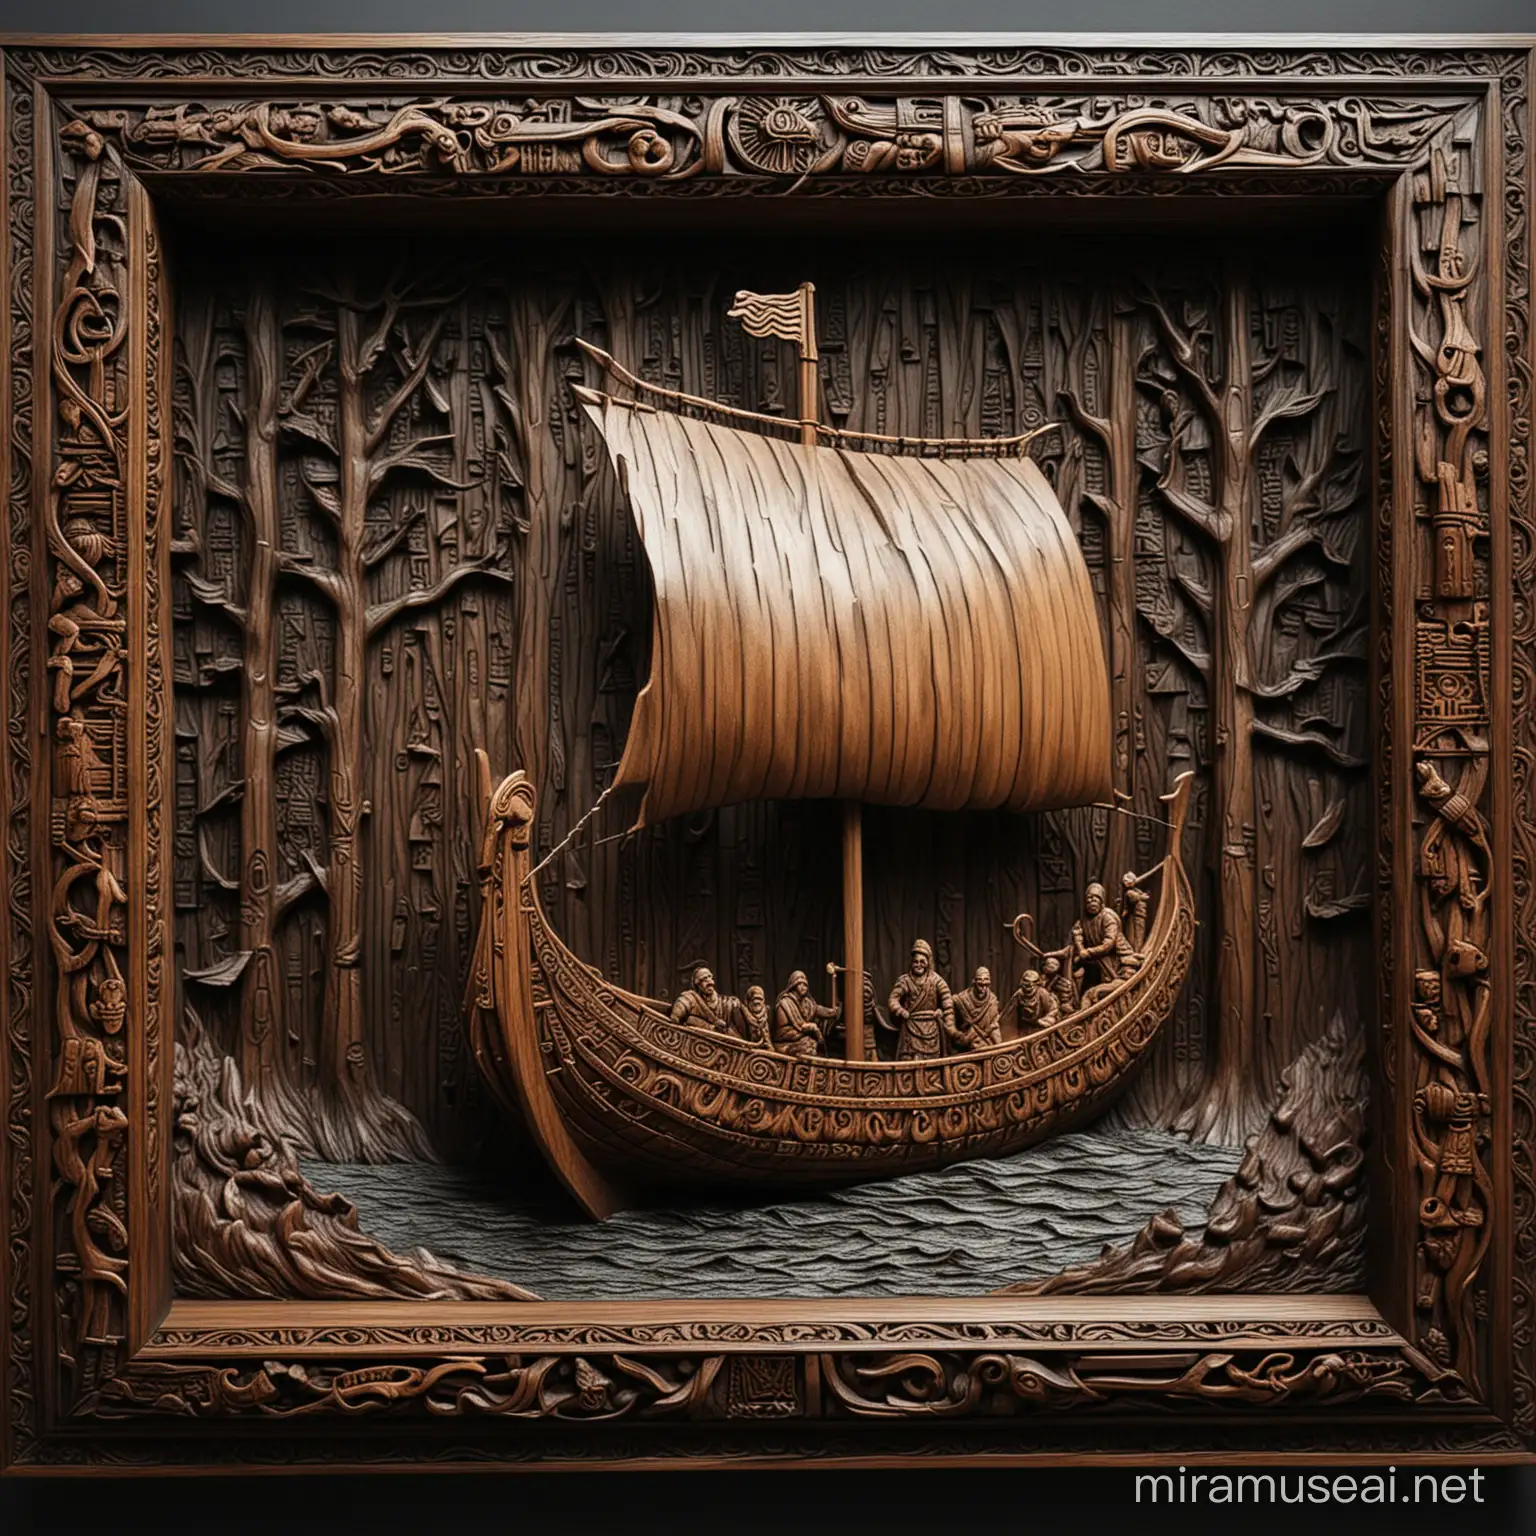 Viking long ship carved in wood within a dark wood frame